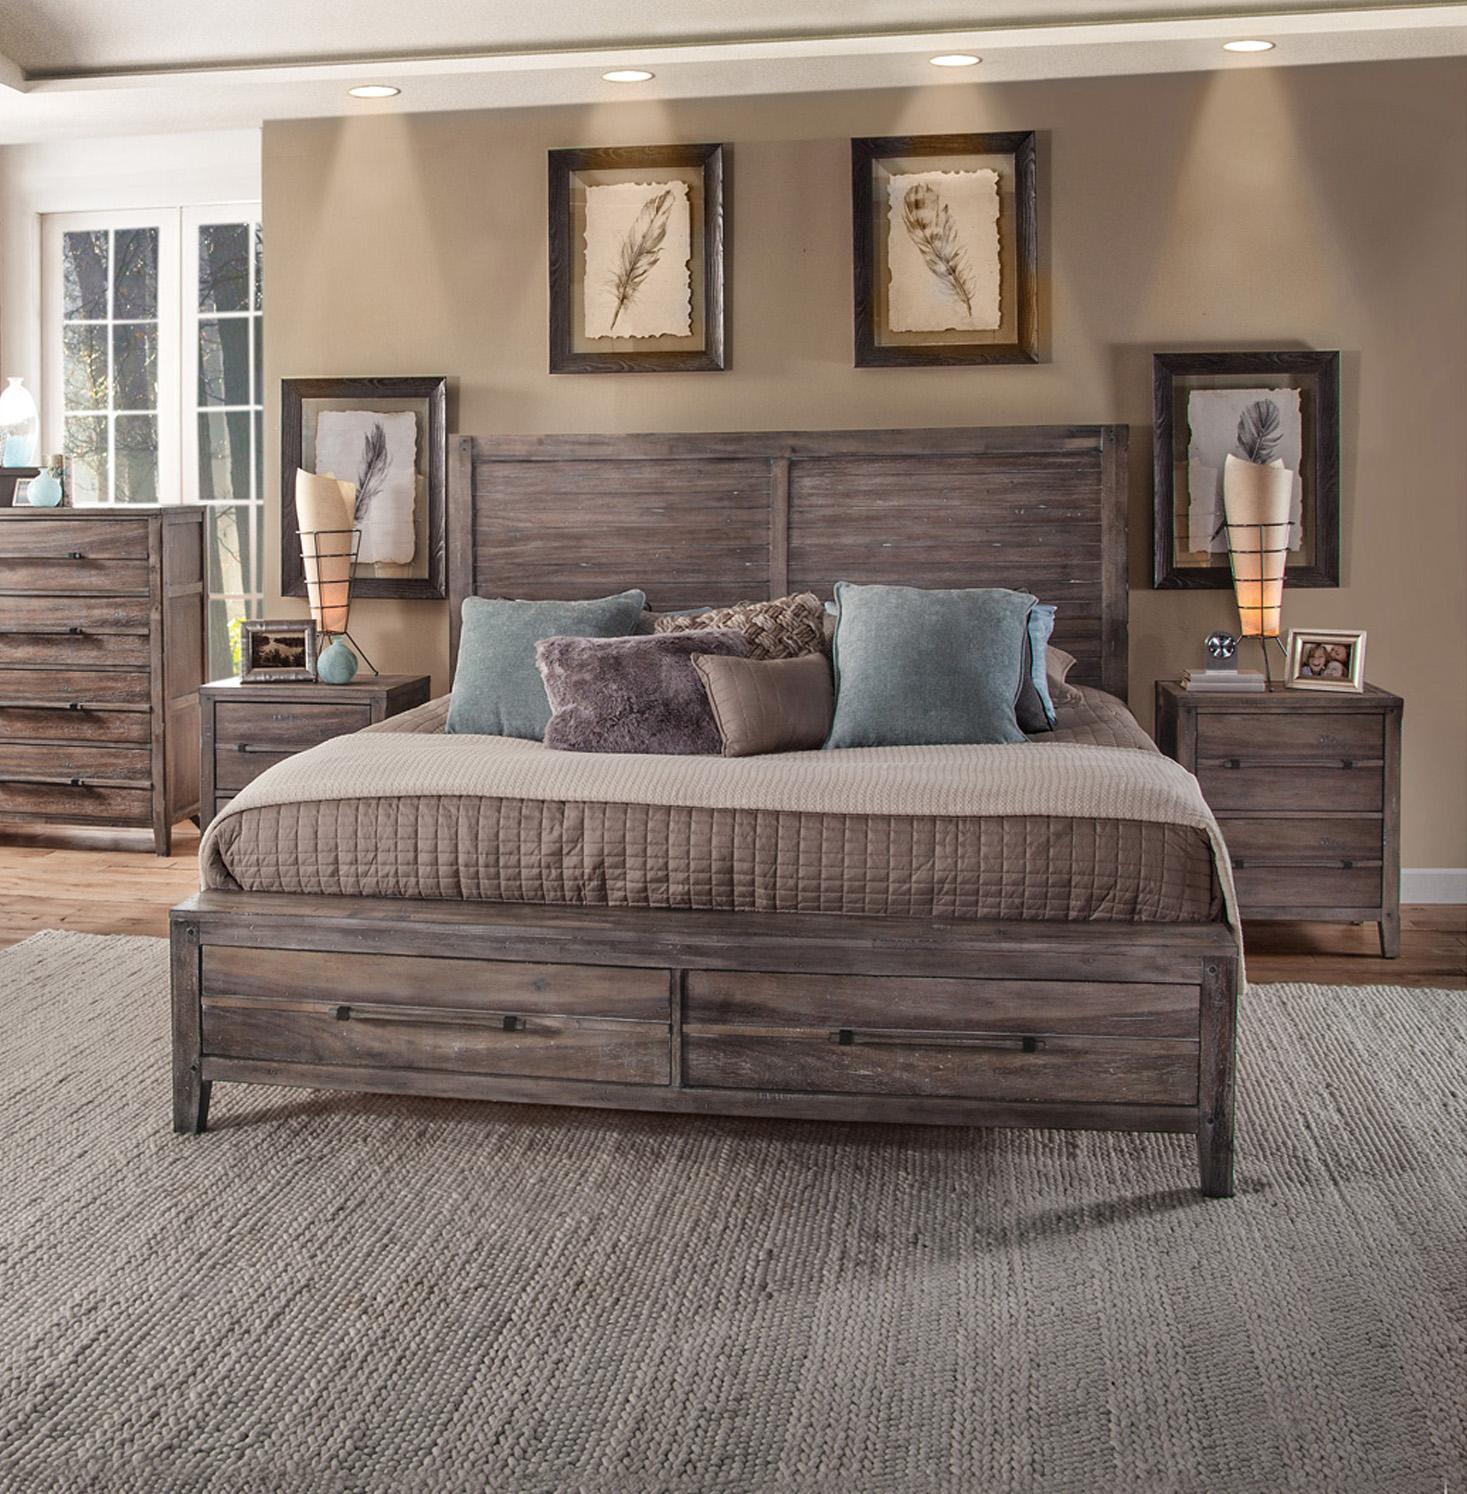 Classic, Traditional Panel Bed AURORA 2800-50PNST 2800-50PNST in Driftwood, Gray 